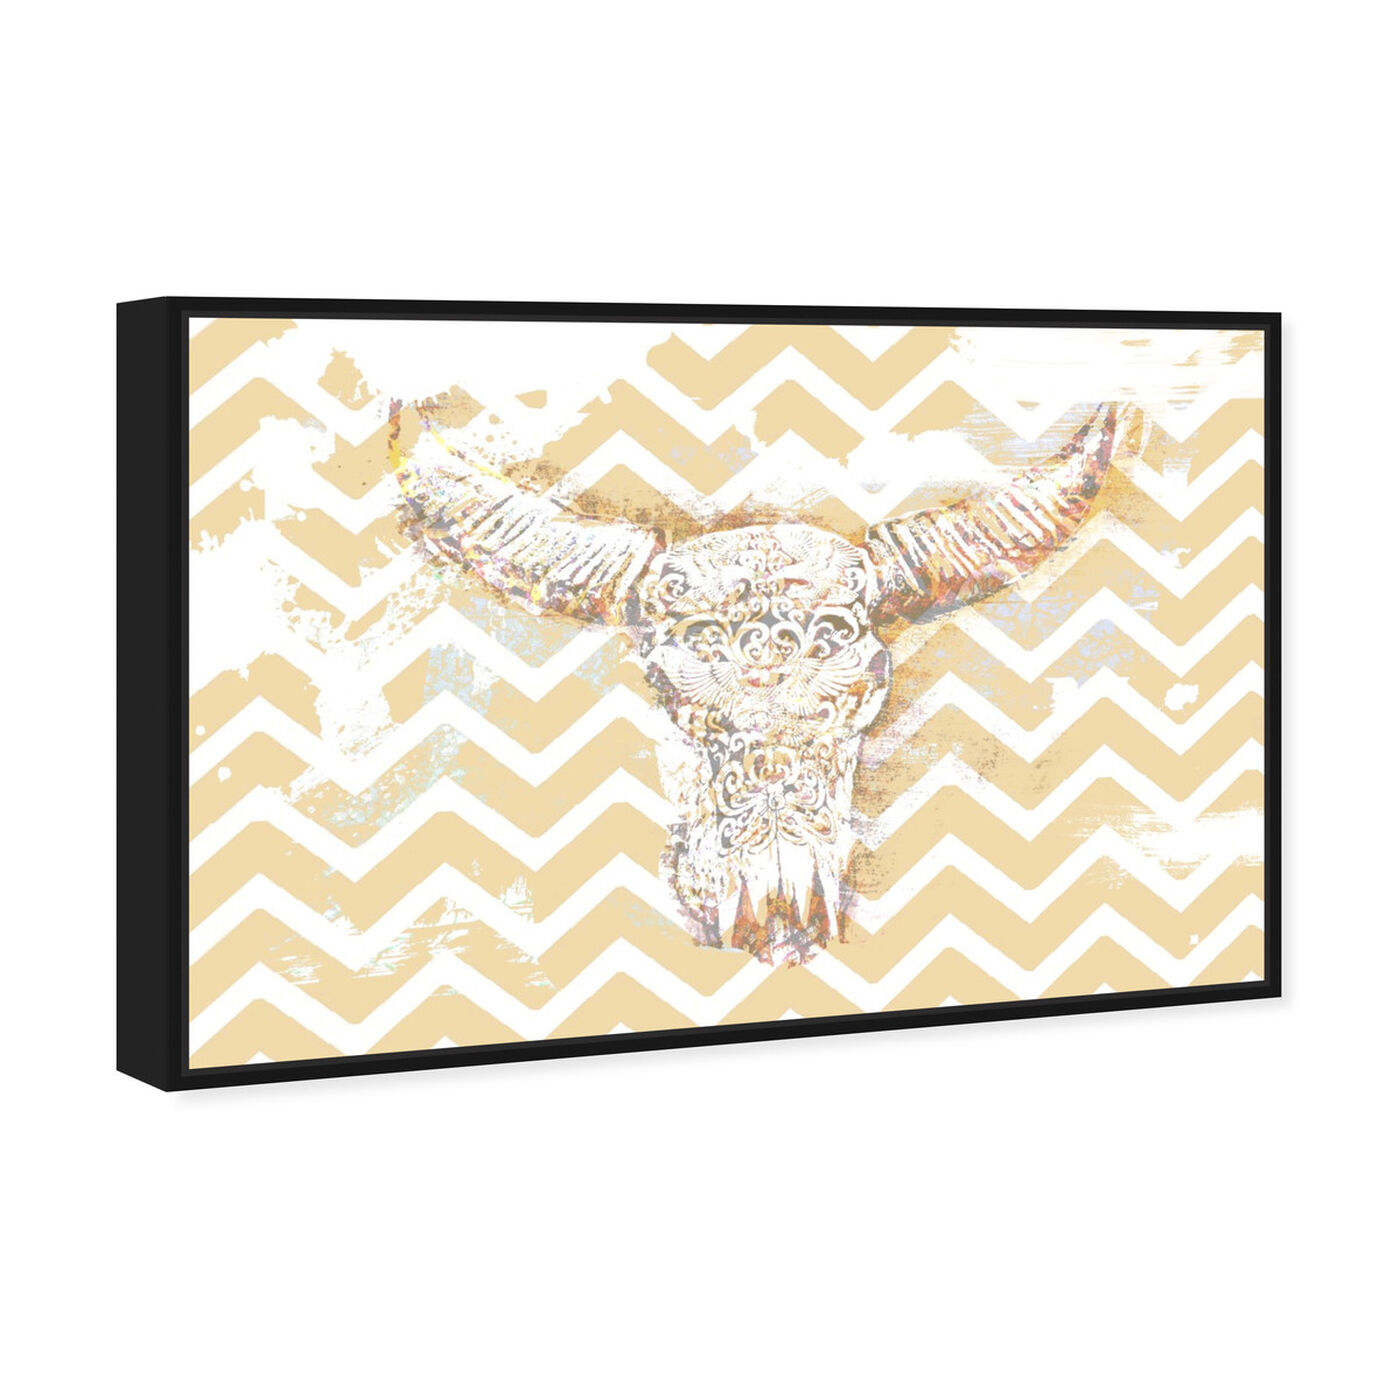 Angled view of Chevron Skull featuring animals and farm animals art.